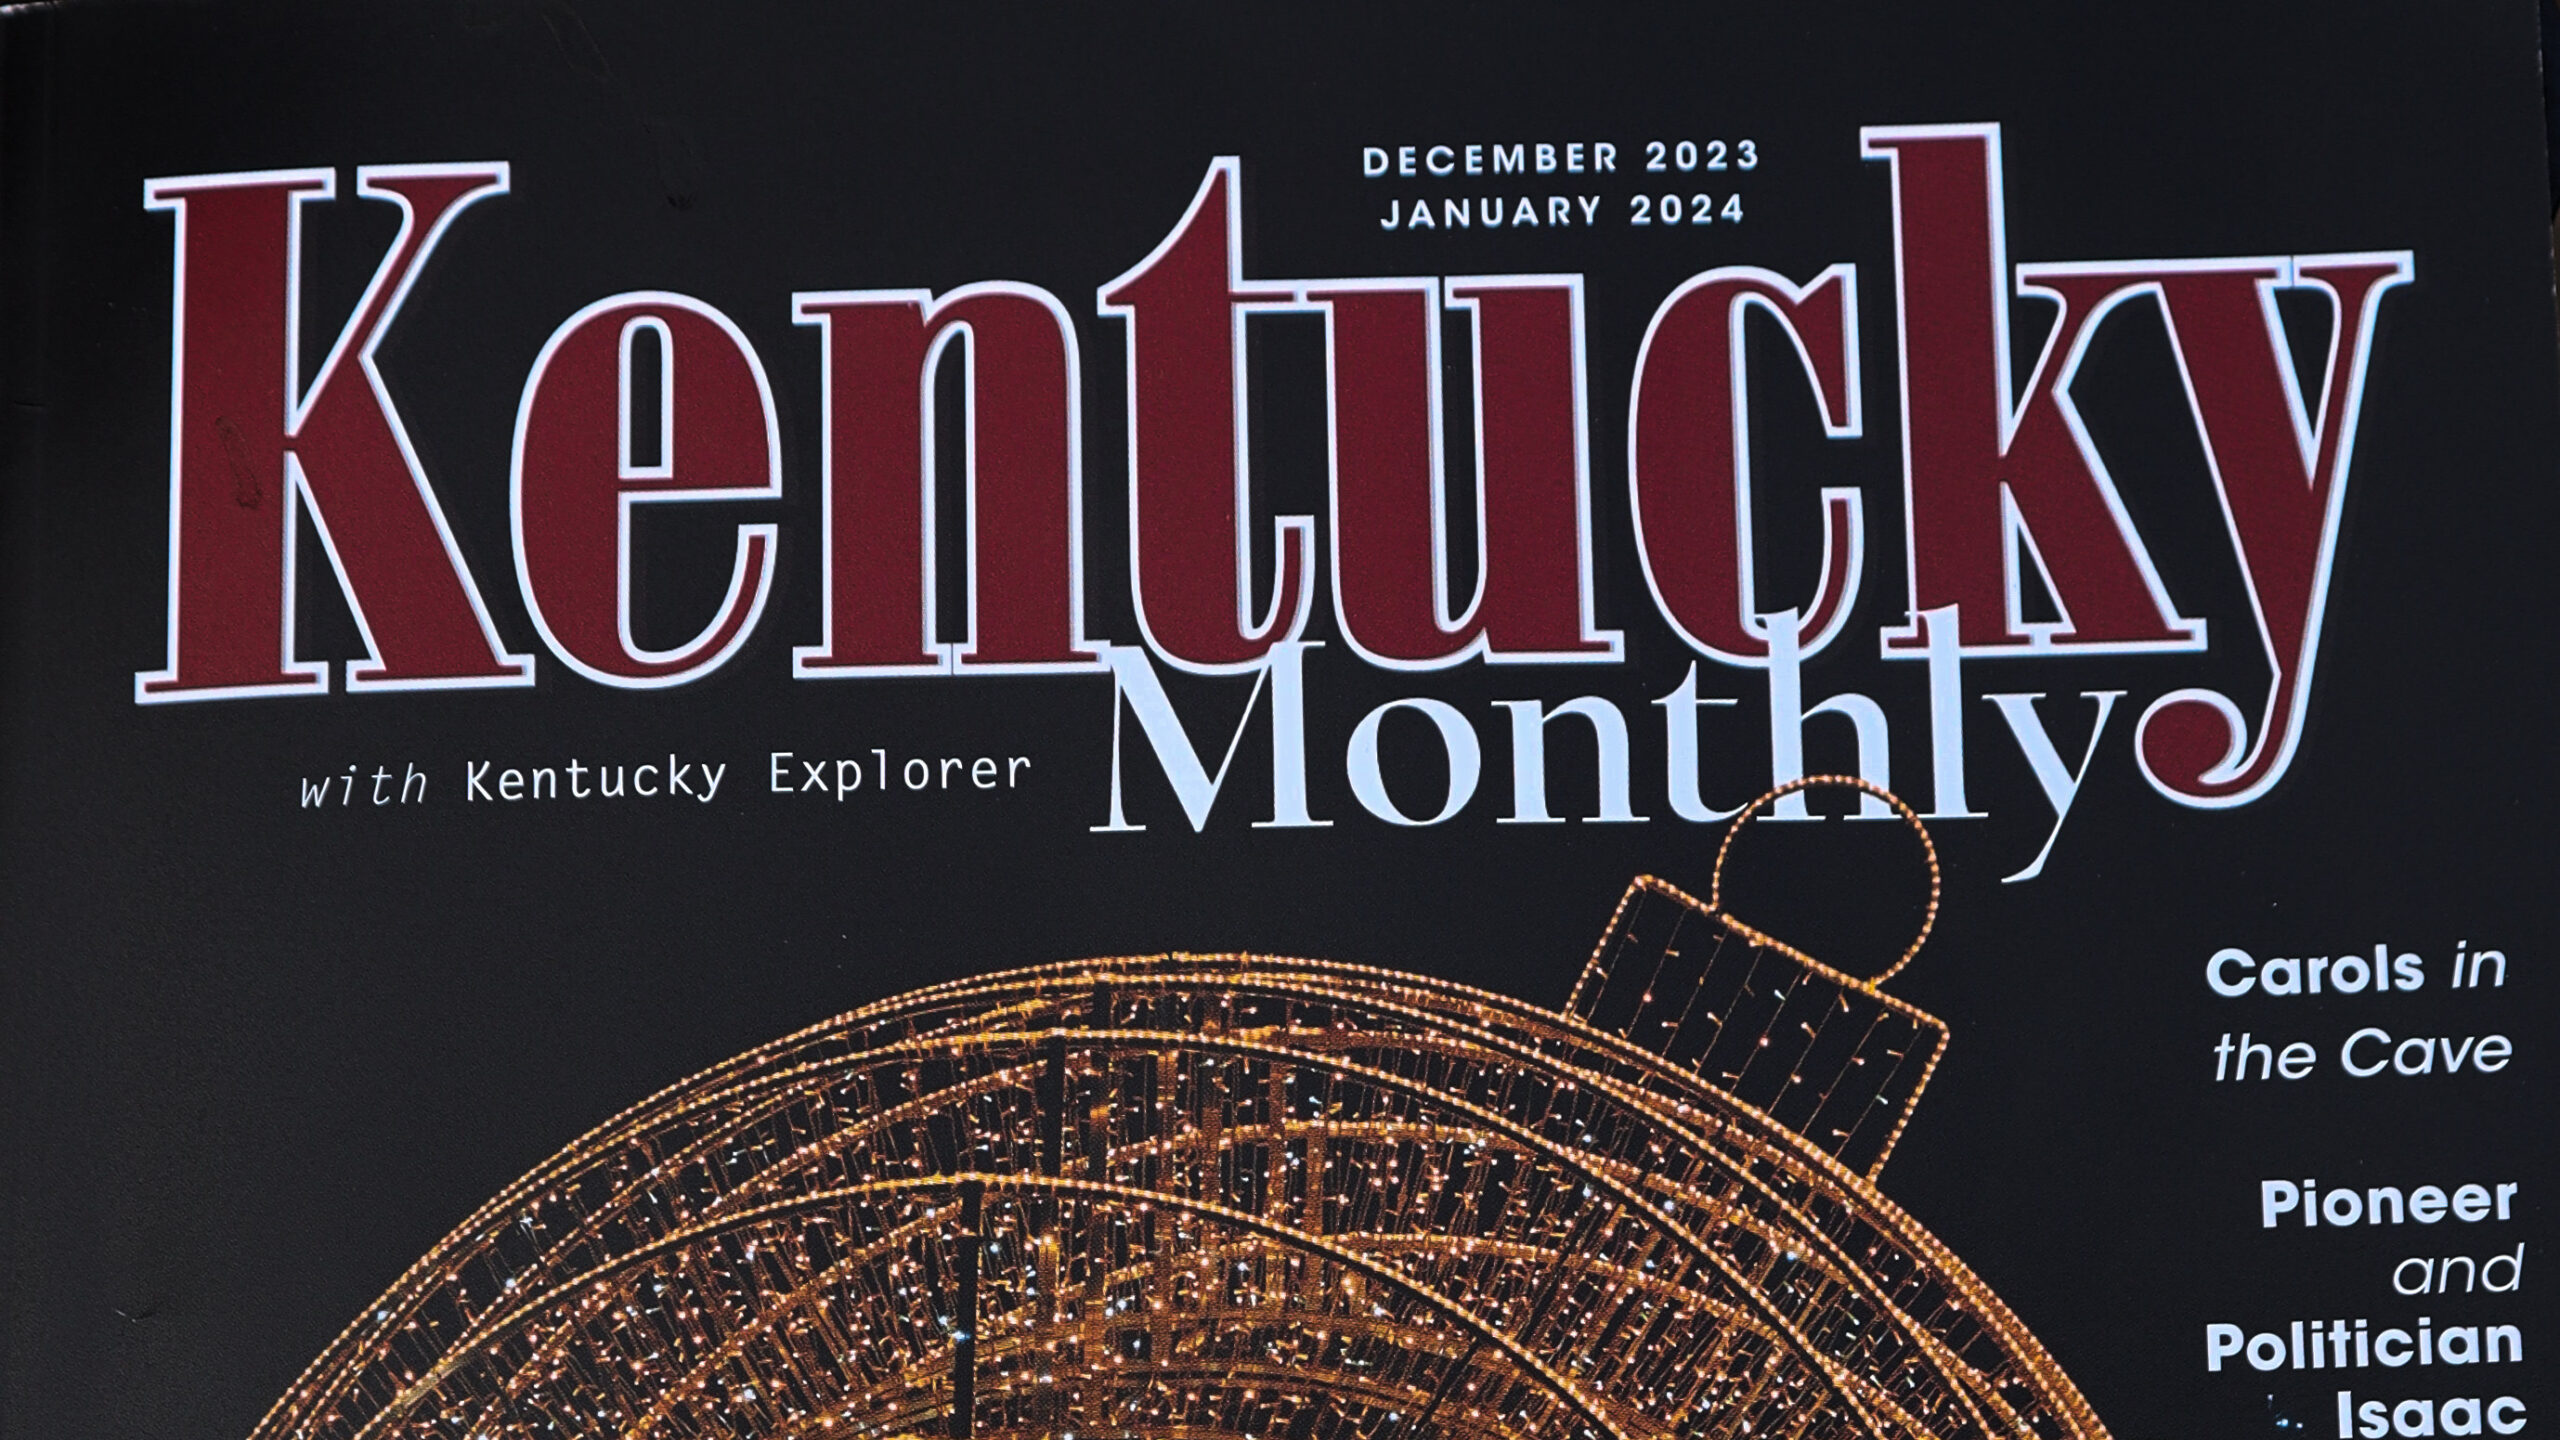 42 Kentucky Monthly – My Thoughts